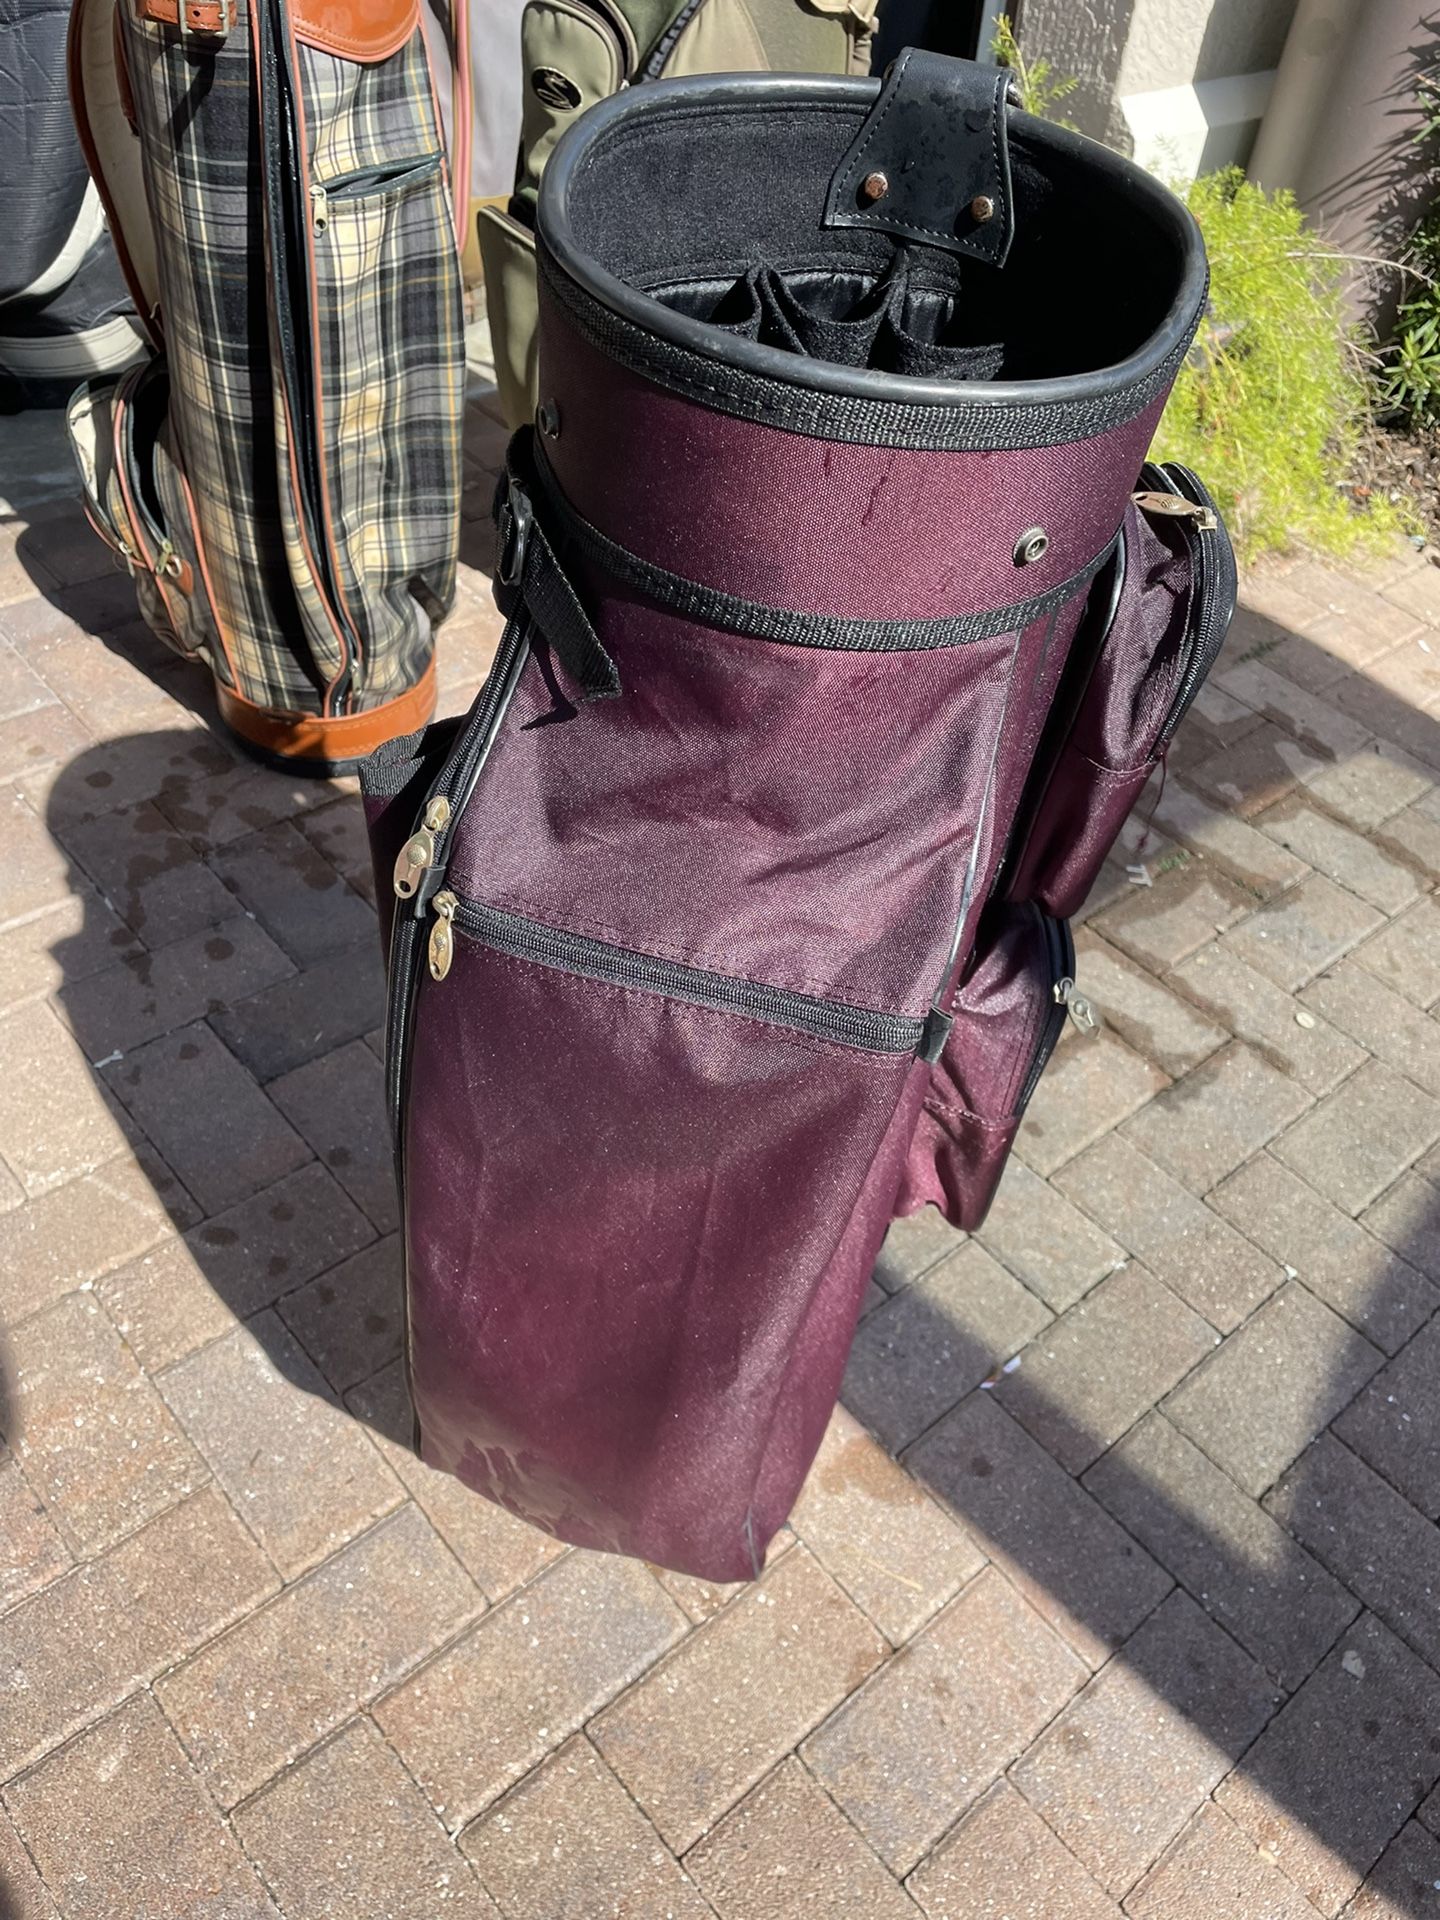 Woman’s golf cart bag with club dividers